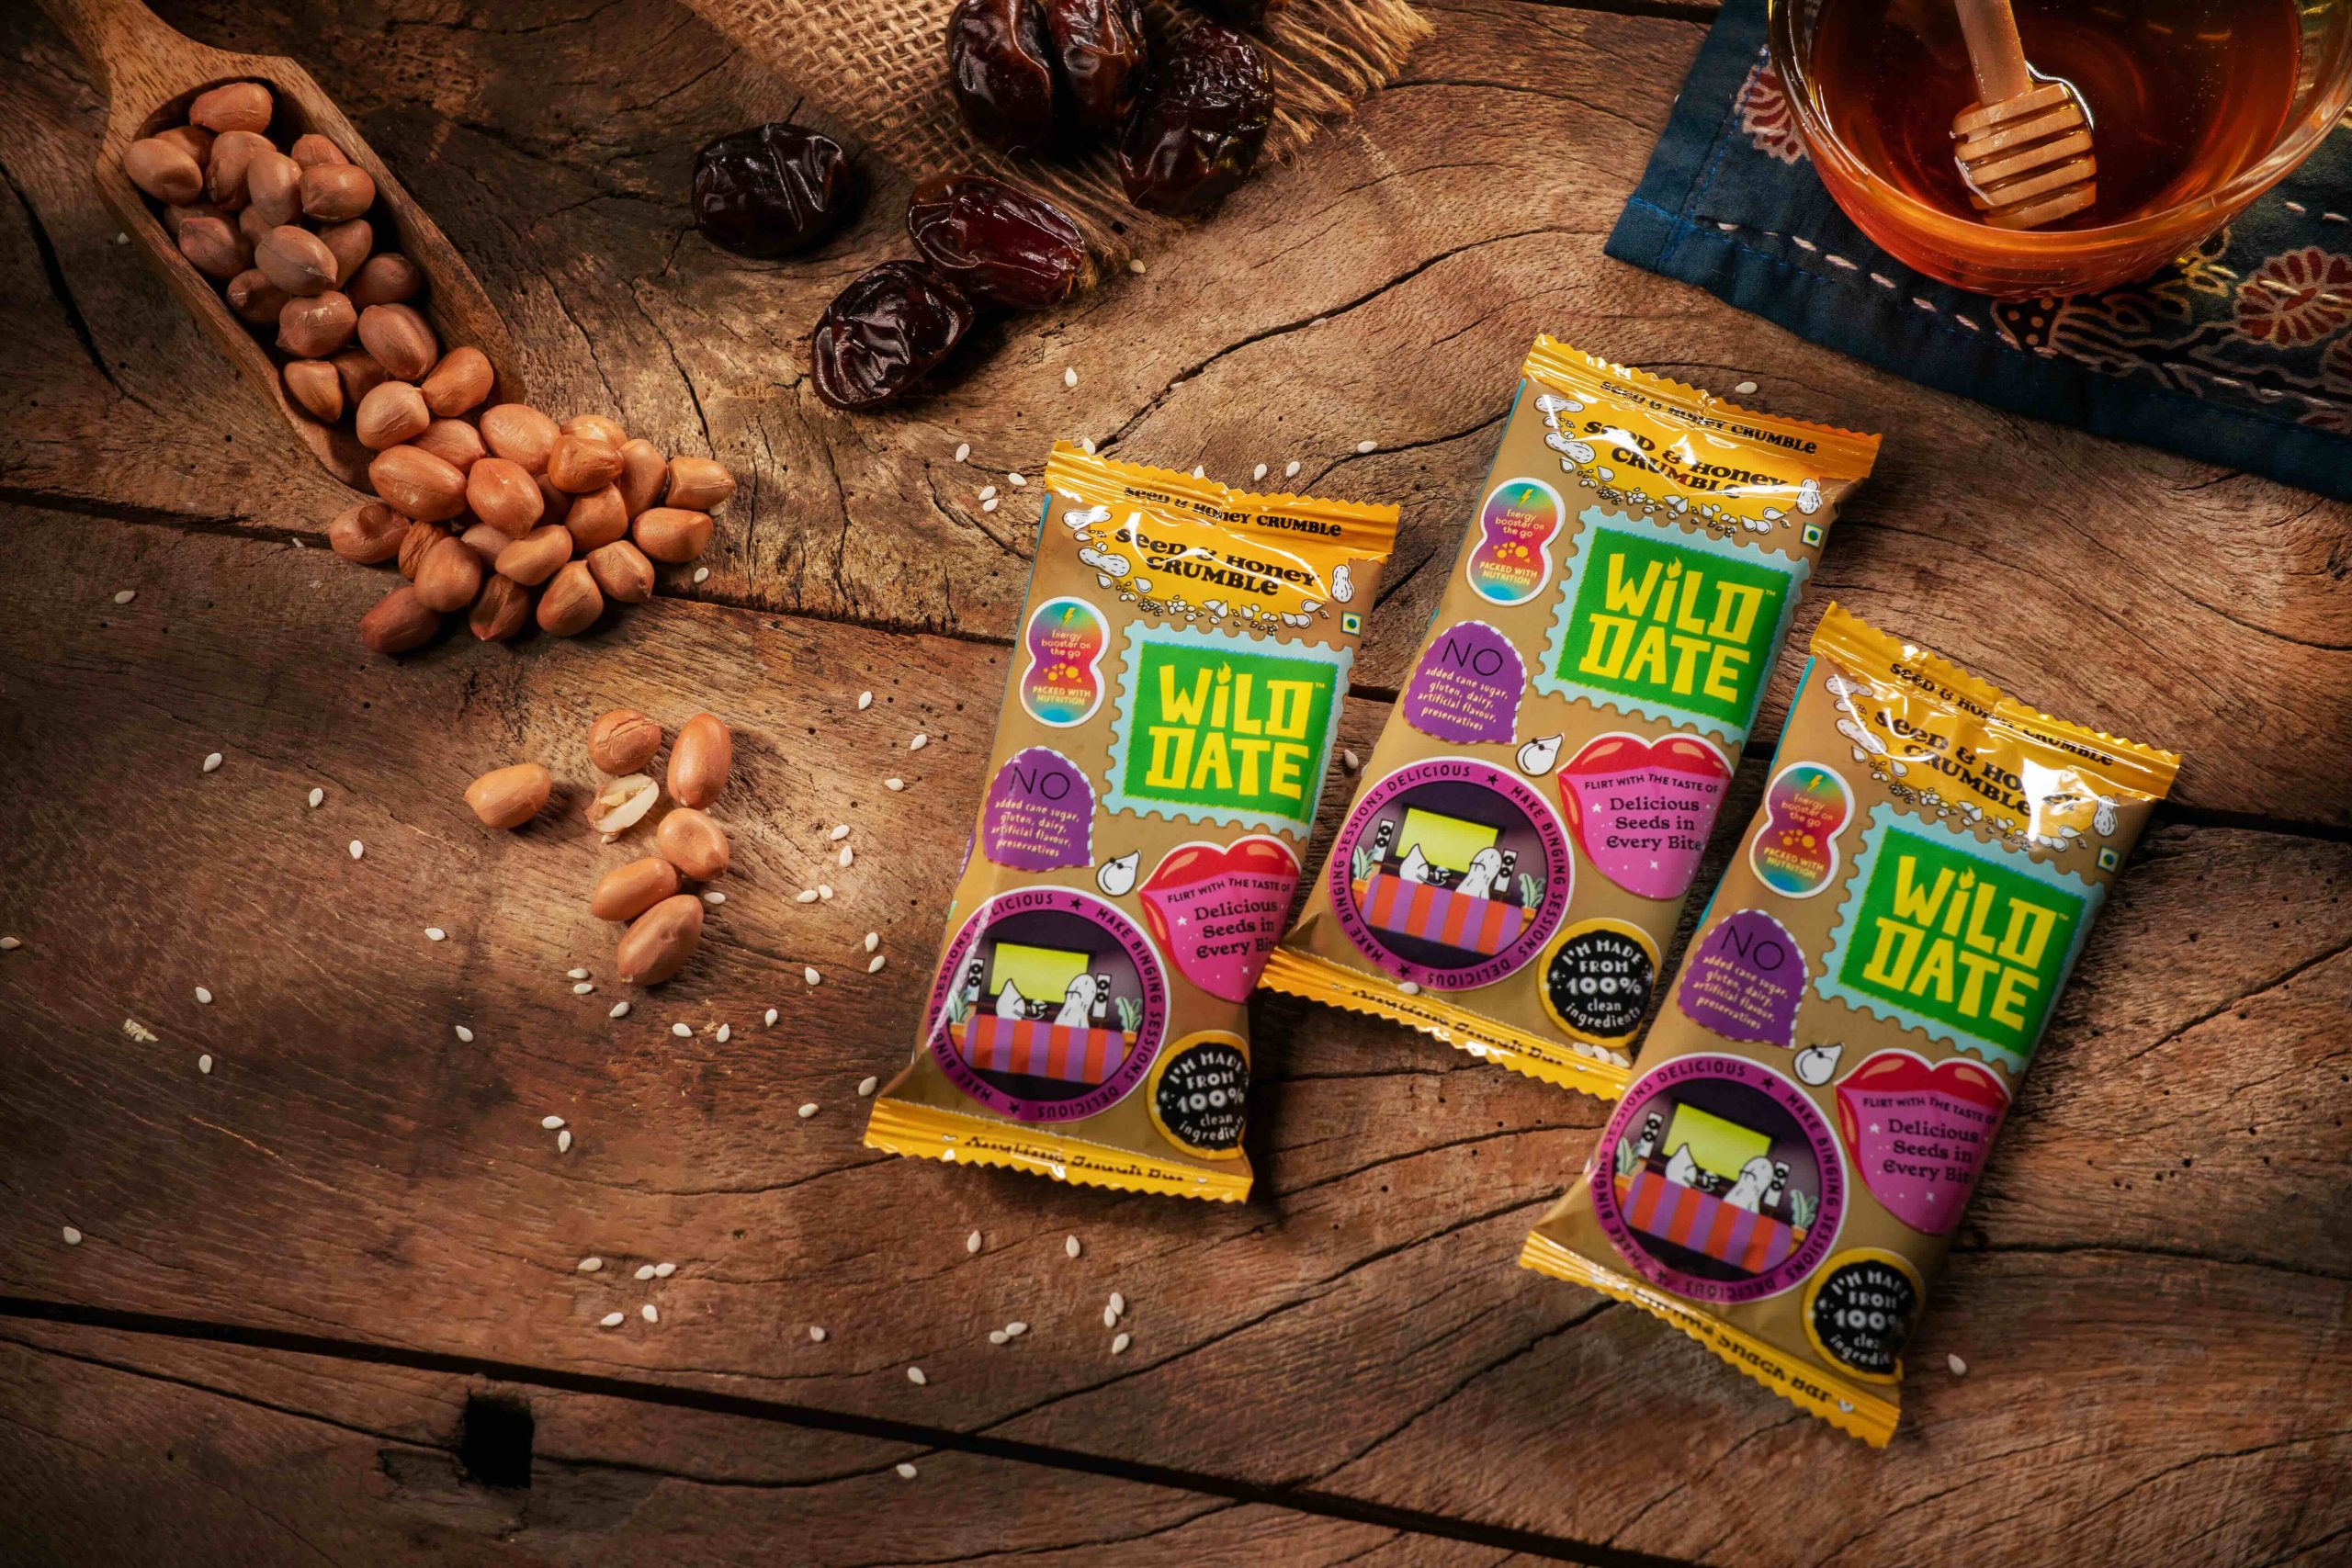 Wild Date snack bars | Packaging design by The Content Lab